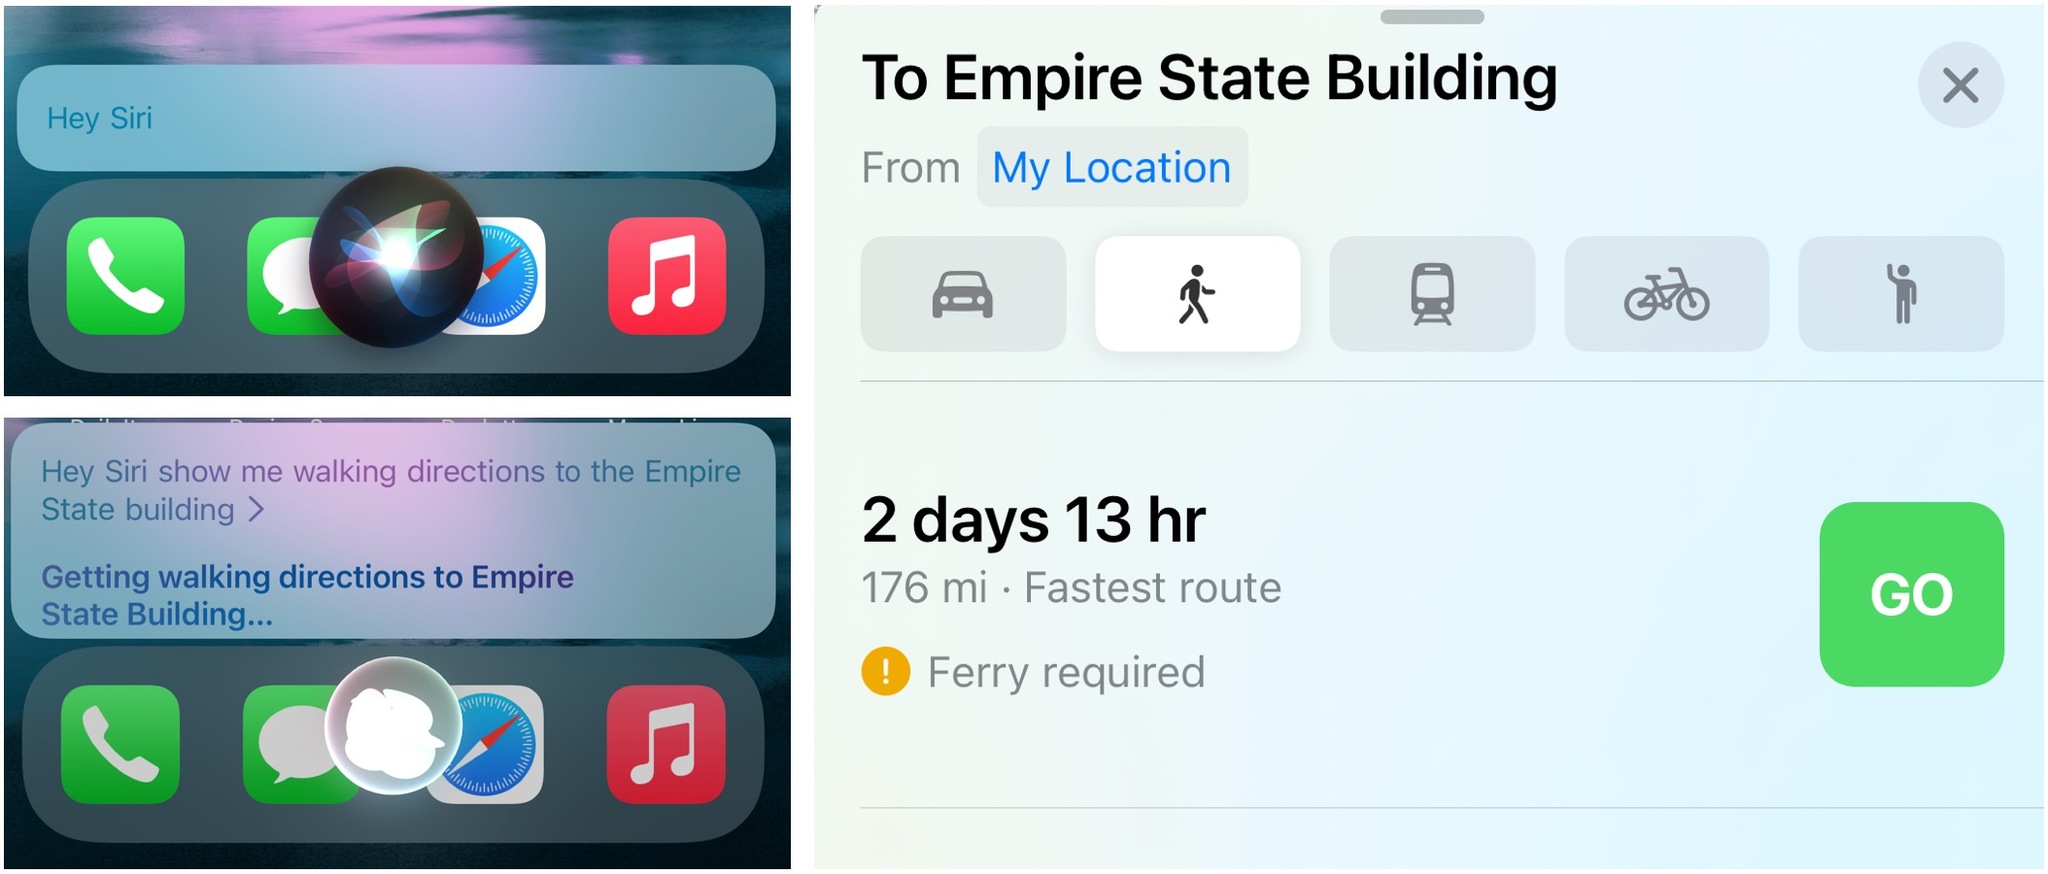 To get walking directions with Maps and Siri, say "Hey Siri, show me walking directions to (the location)." Tap Go to start voice navigation. 